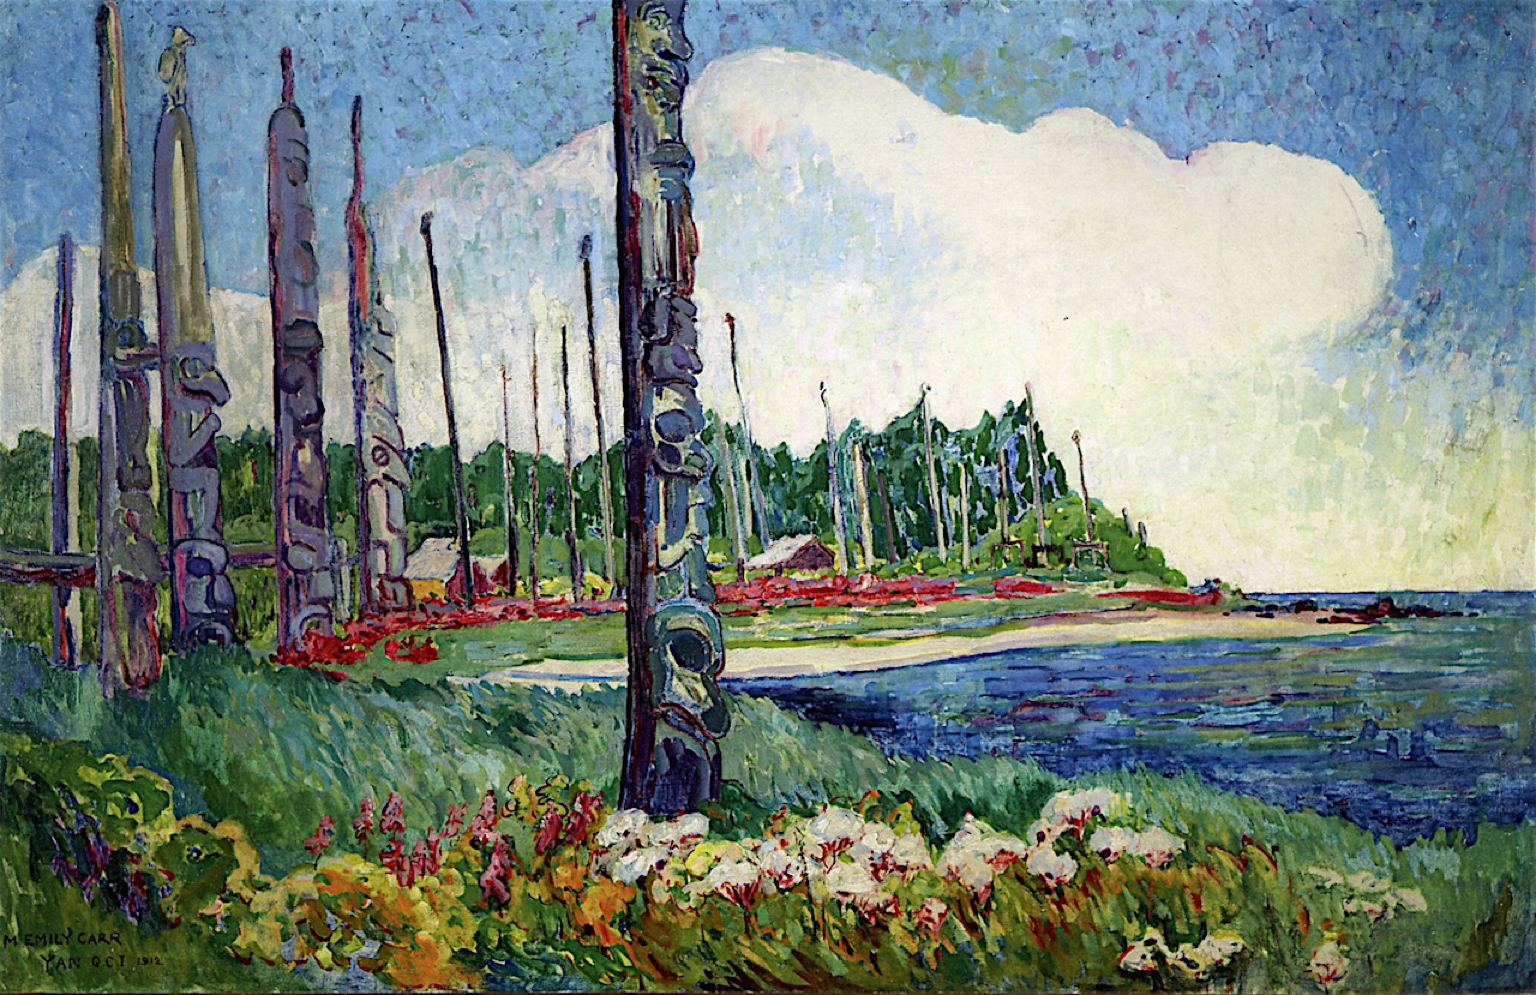 Emily Carr depiction of a village site, early 1900's